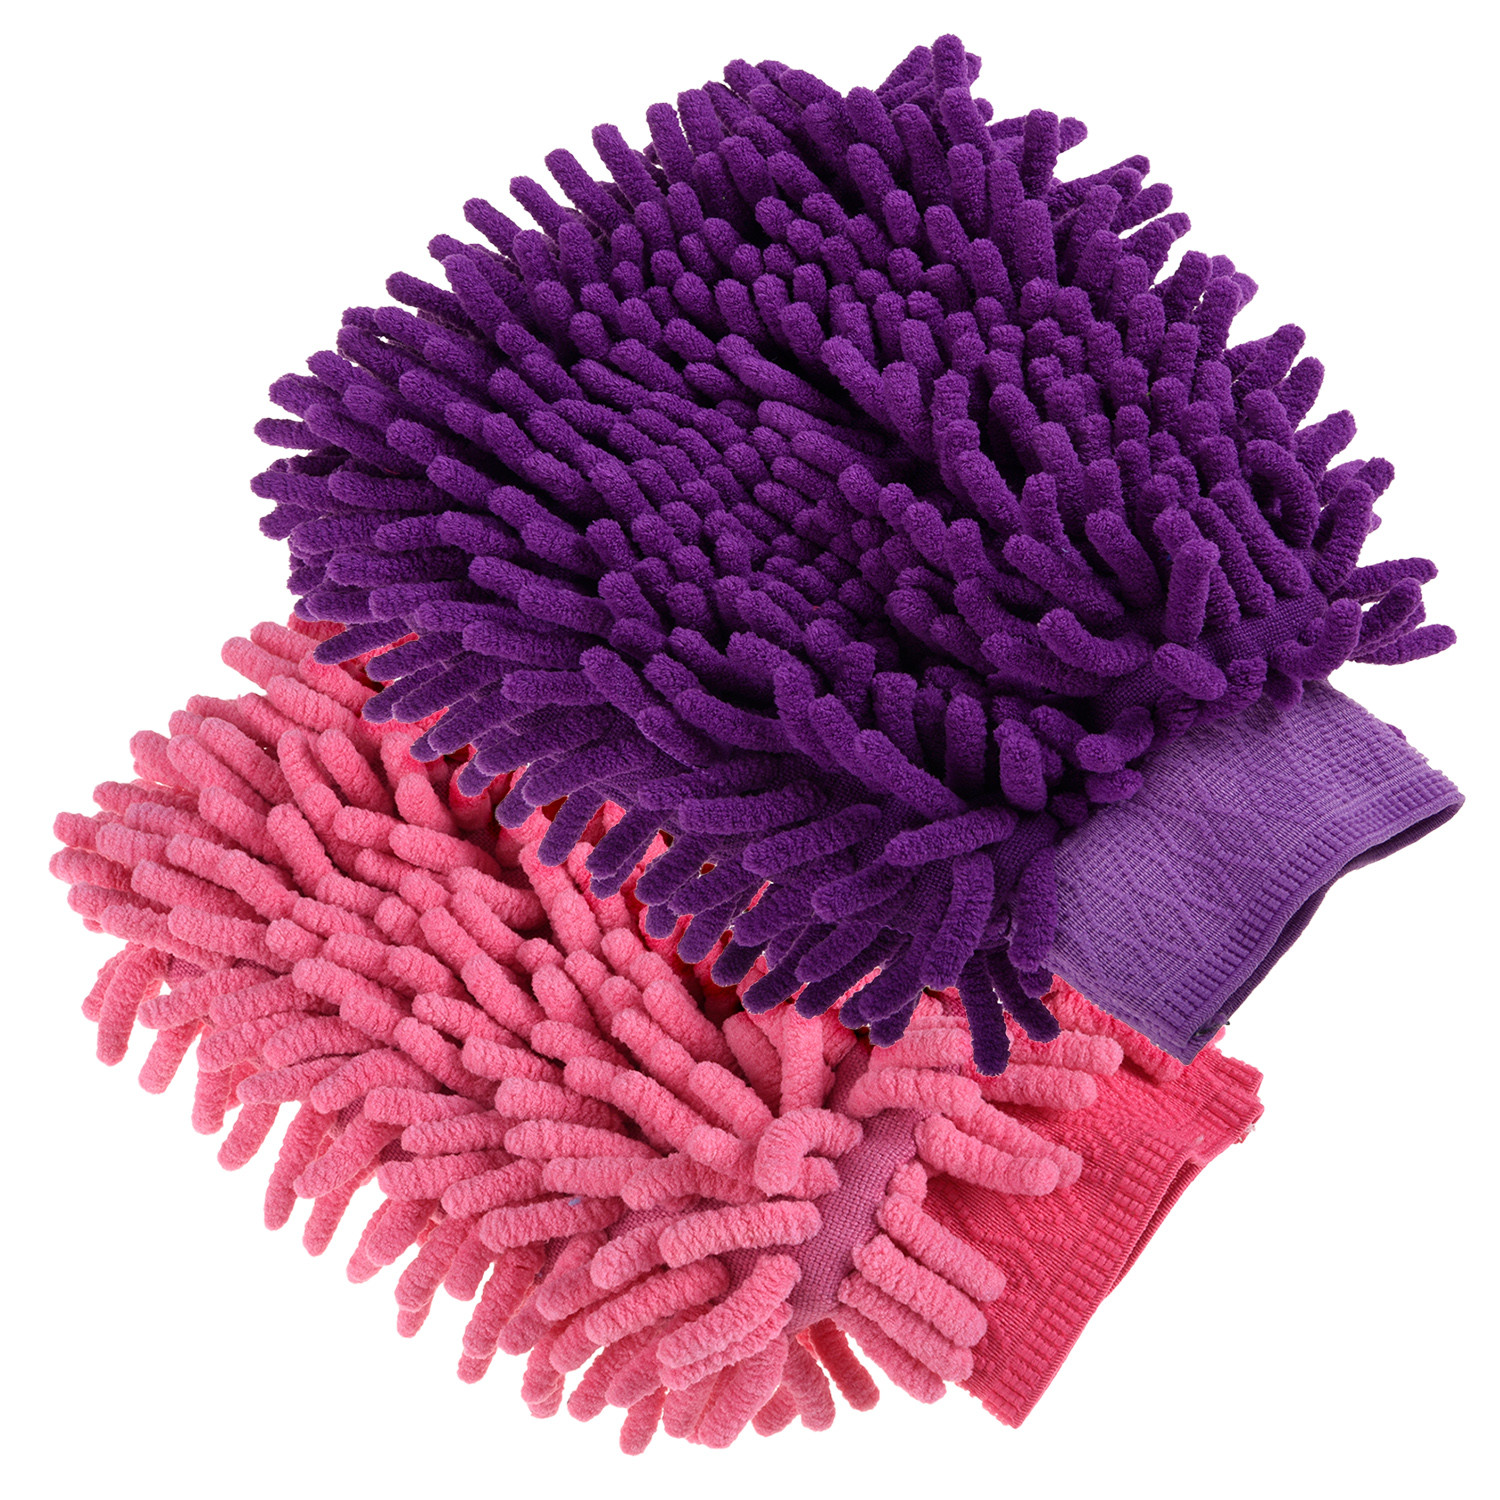 Kuber Industries Chenille Mitts|Microfiber Cleaning Gloves|Inside Waterproof Cloth Gloves|100 Gram Weighted Hand Duster|Chenille Gloves For Car|Glass|Pack of 2 (Purple & Pink)